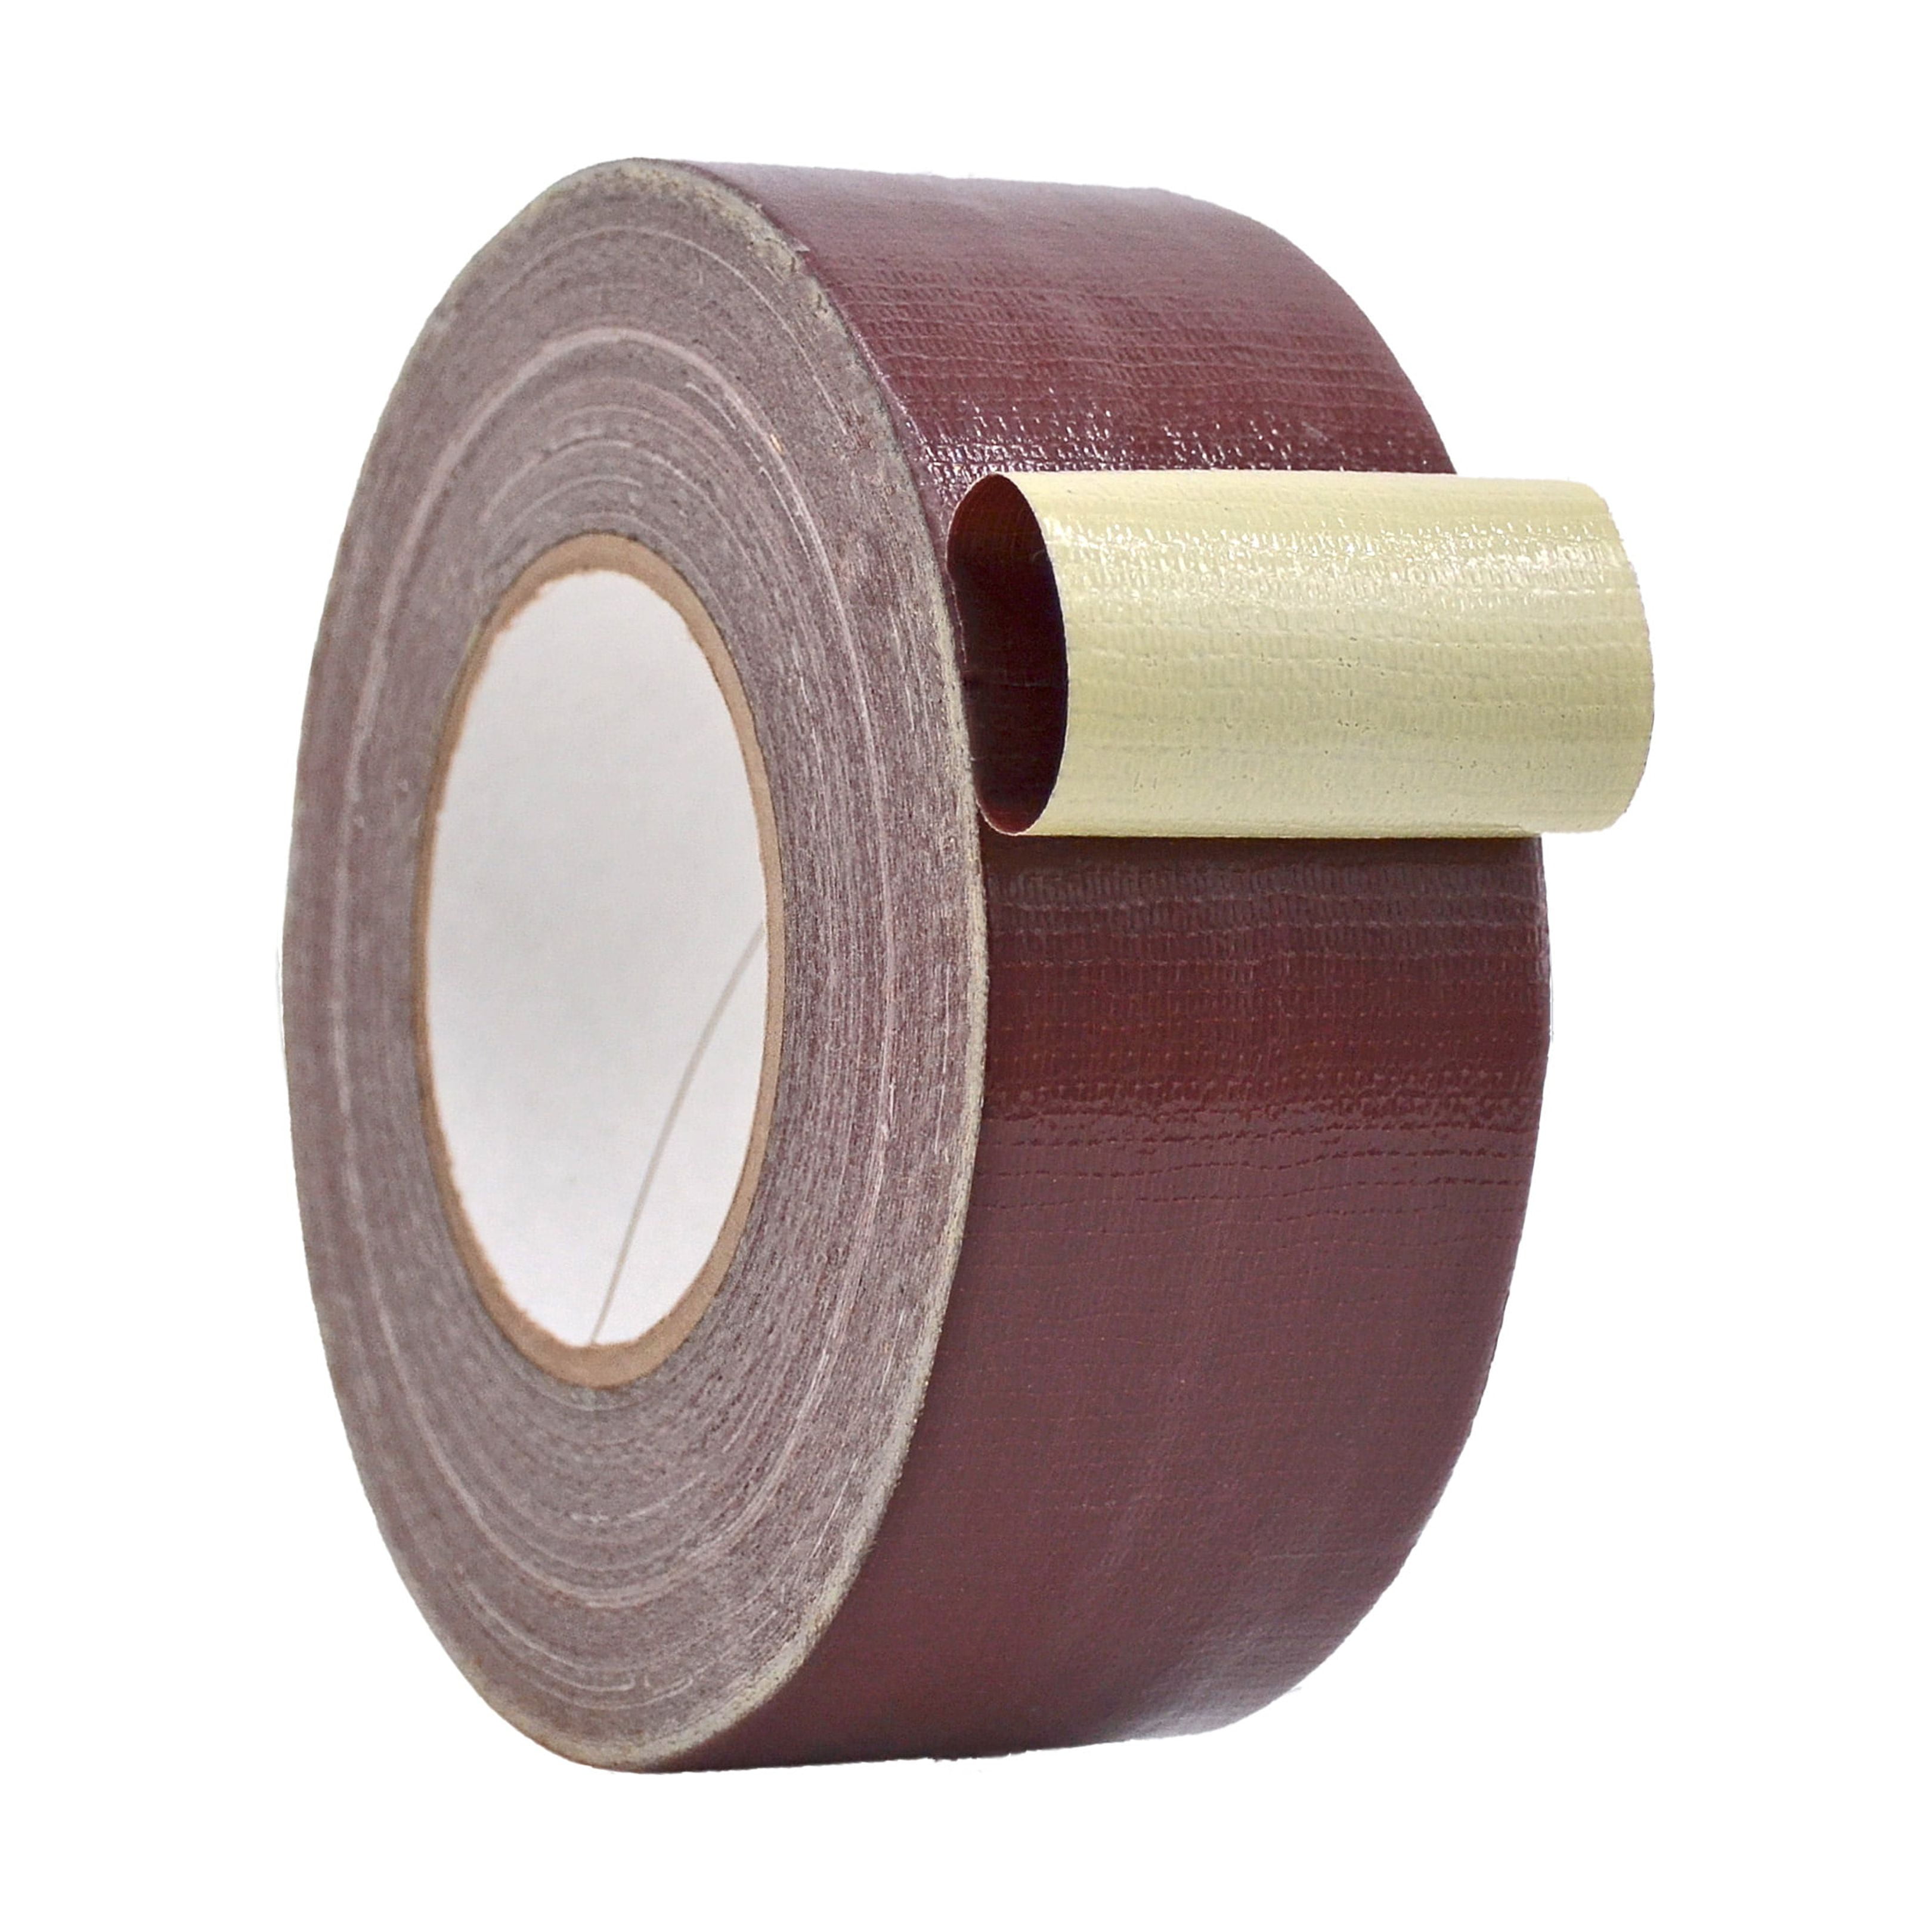 Wod Dtc10 Advanced Strength Industrial Grade Brown Duct Tape, 3 inch x 60 yds. Waterproof, UV Resistant for Crafts & Home Improvement